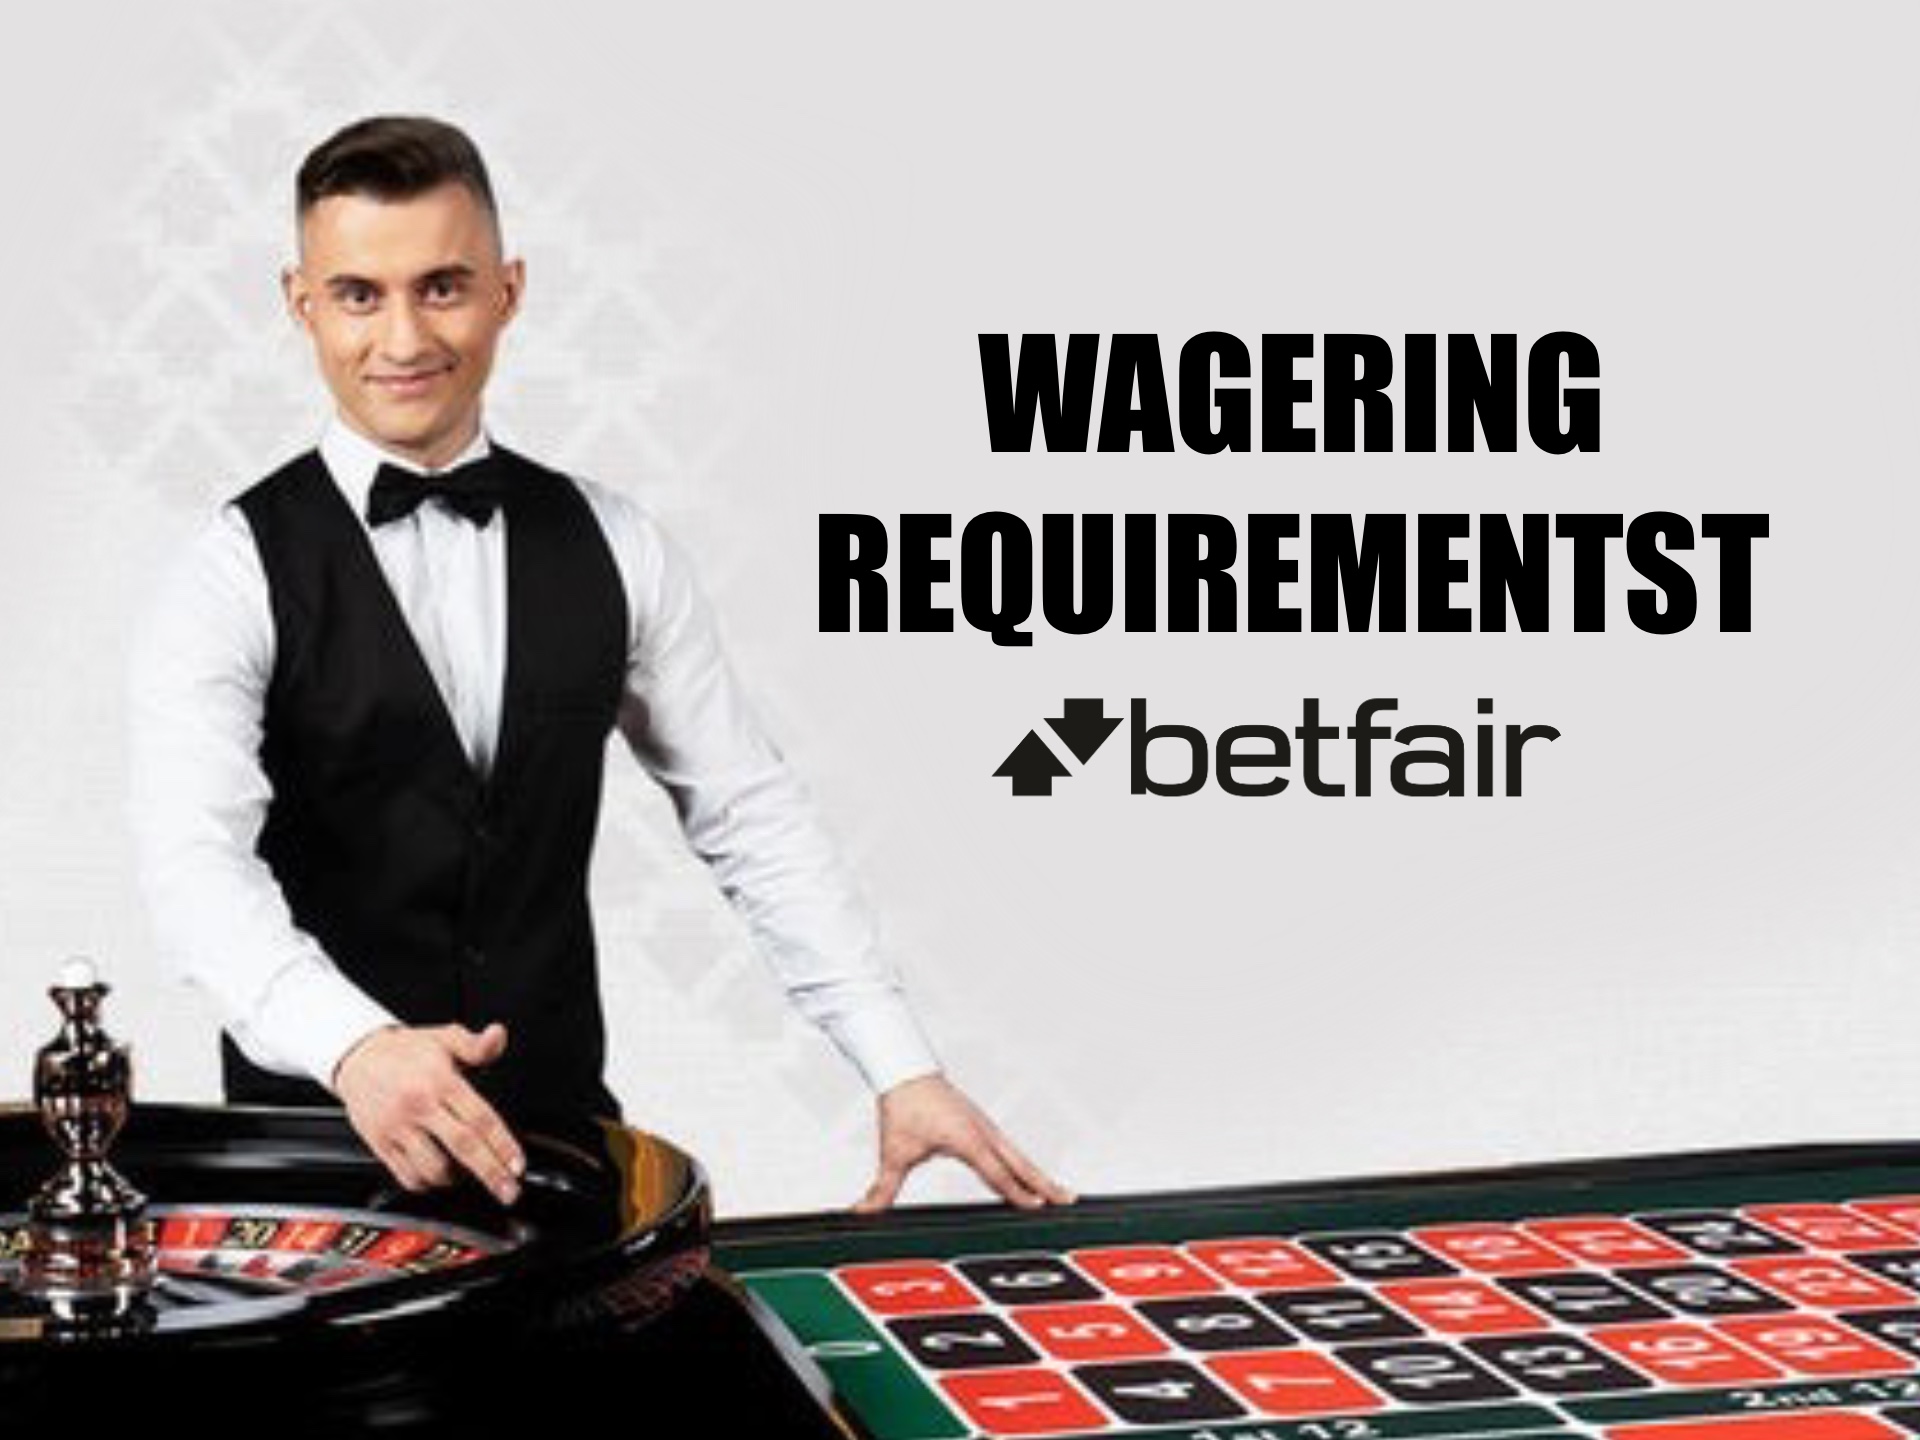 You will have to wager your bonus to be able to withdraw bonus money from Betfair account.